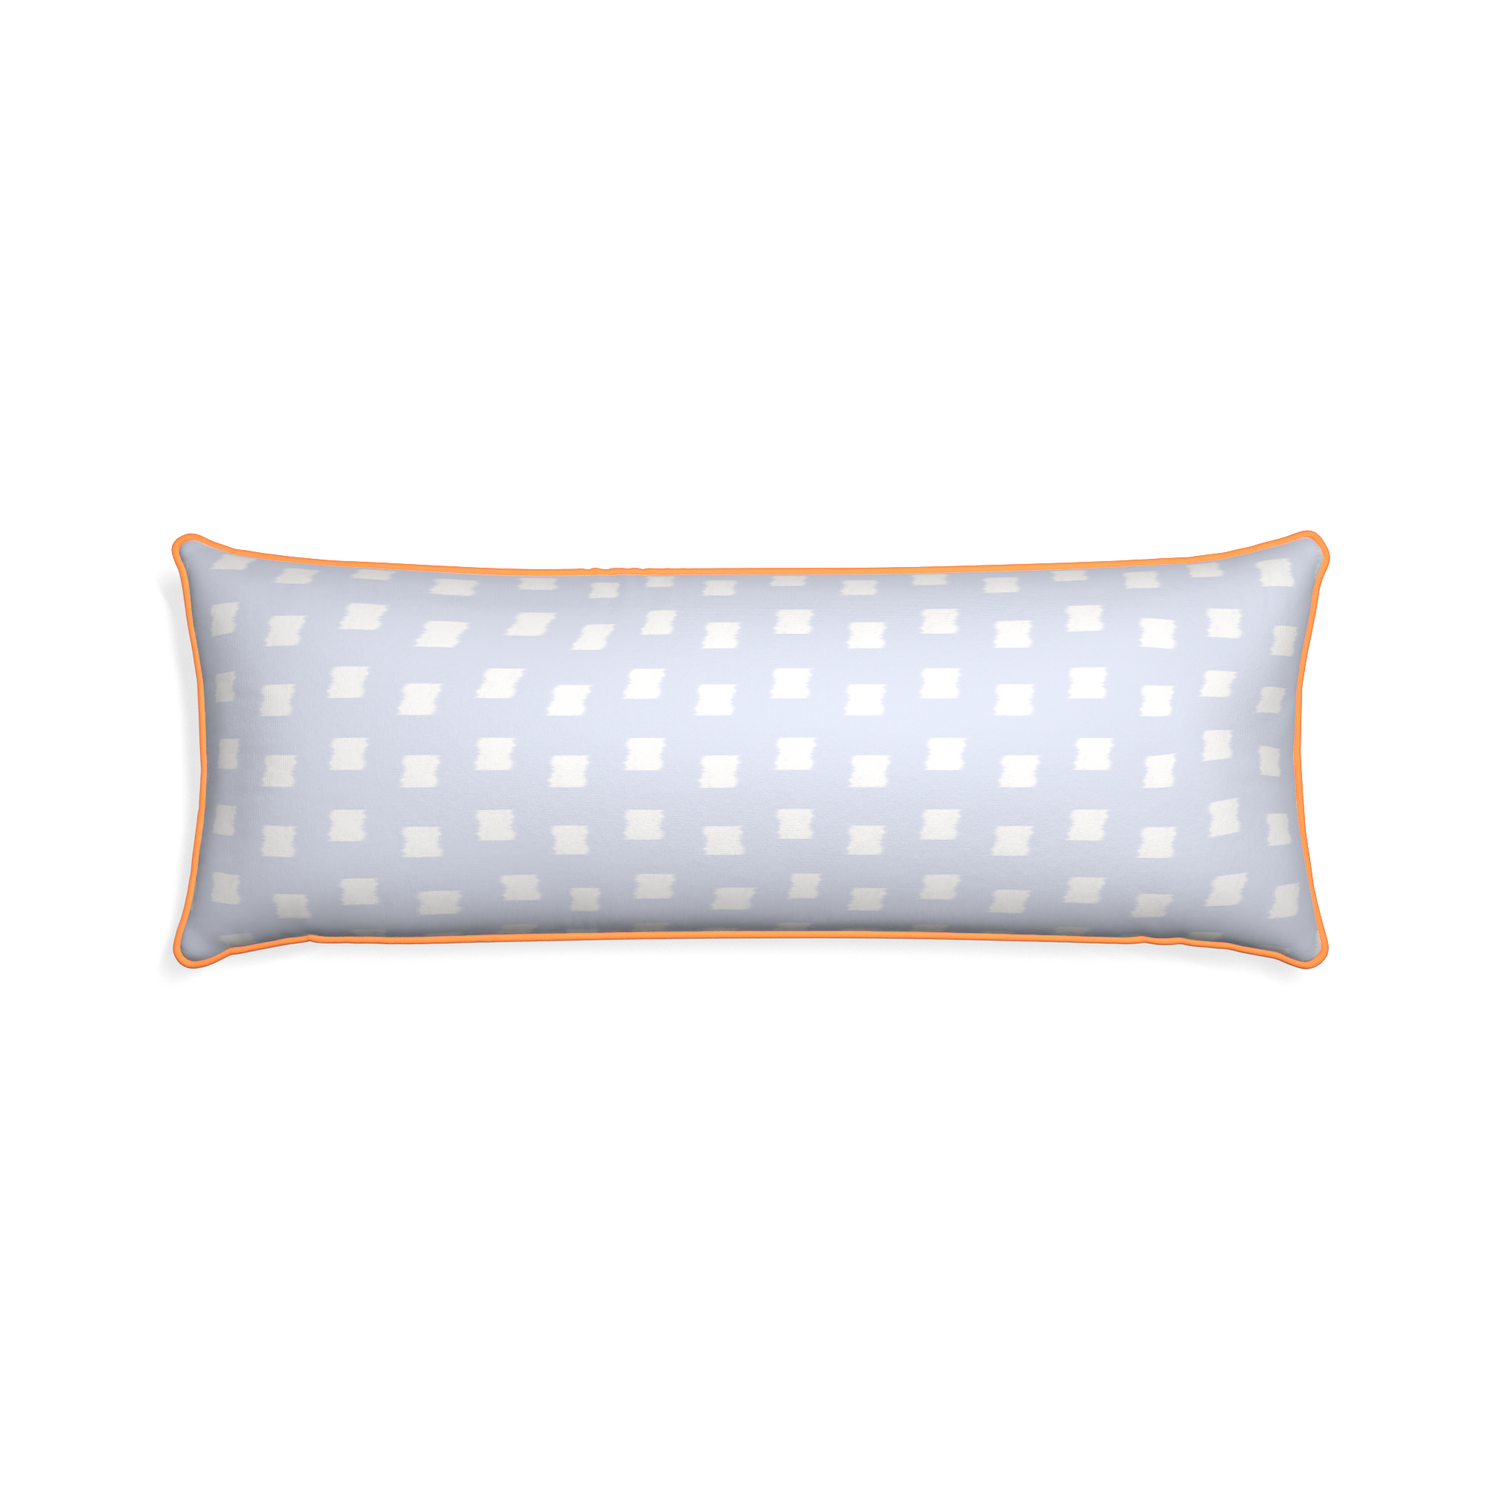 Xl-lumbar denton custom pillow with clementine piping on white background